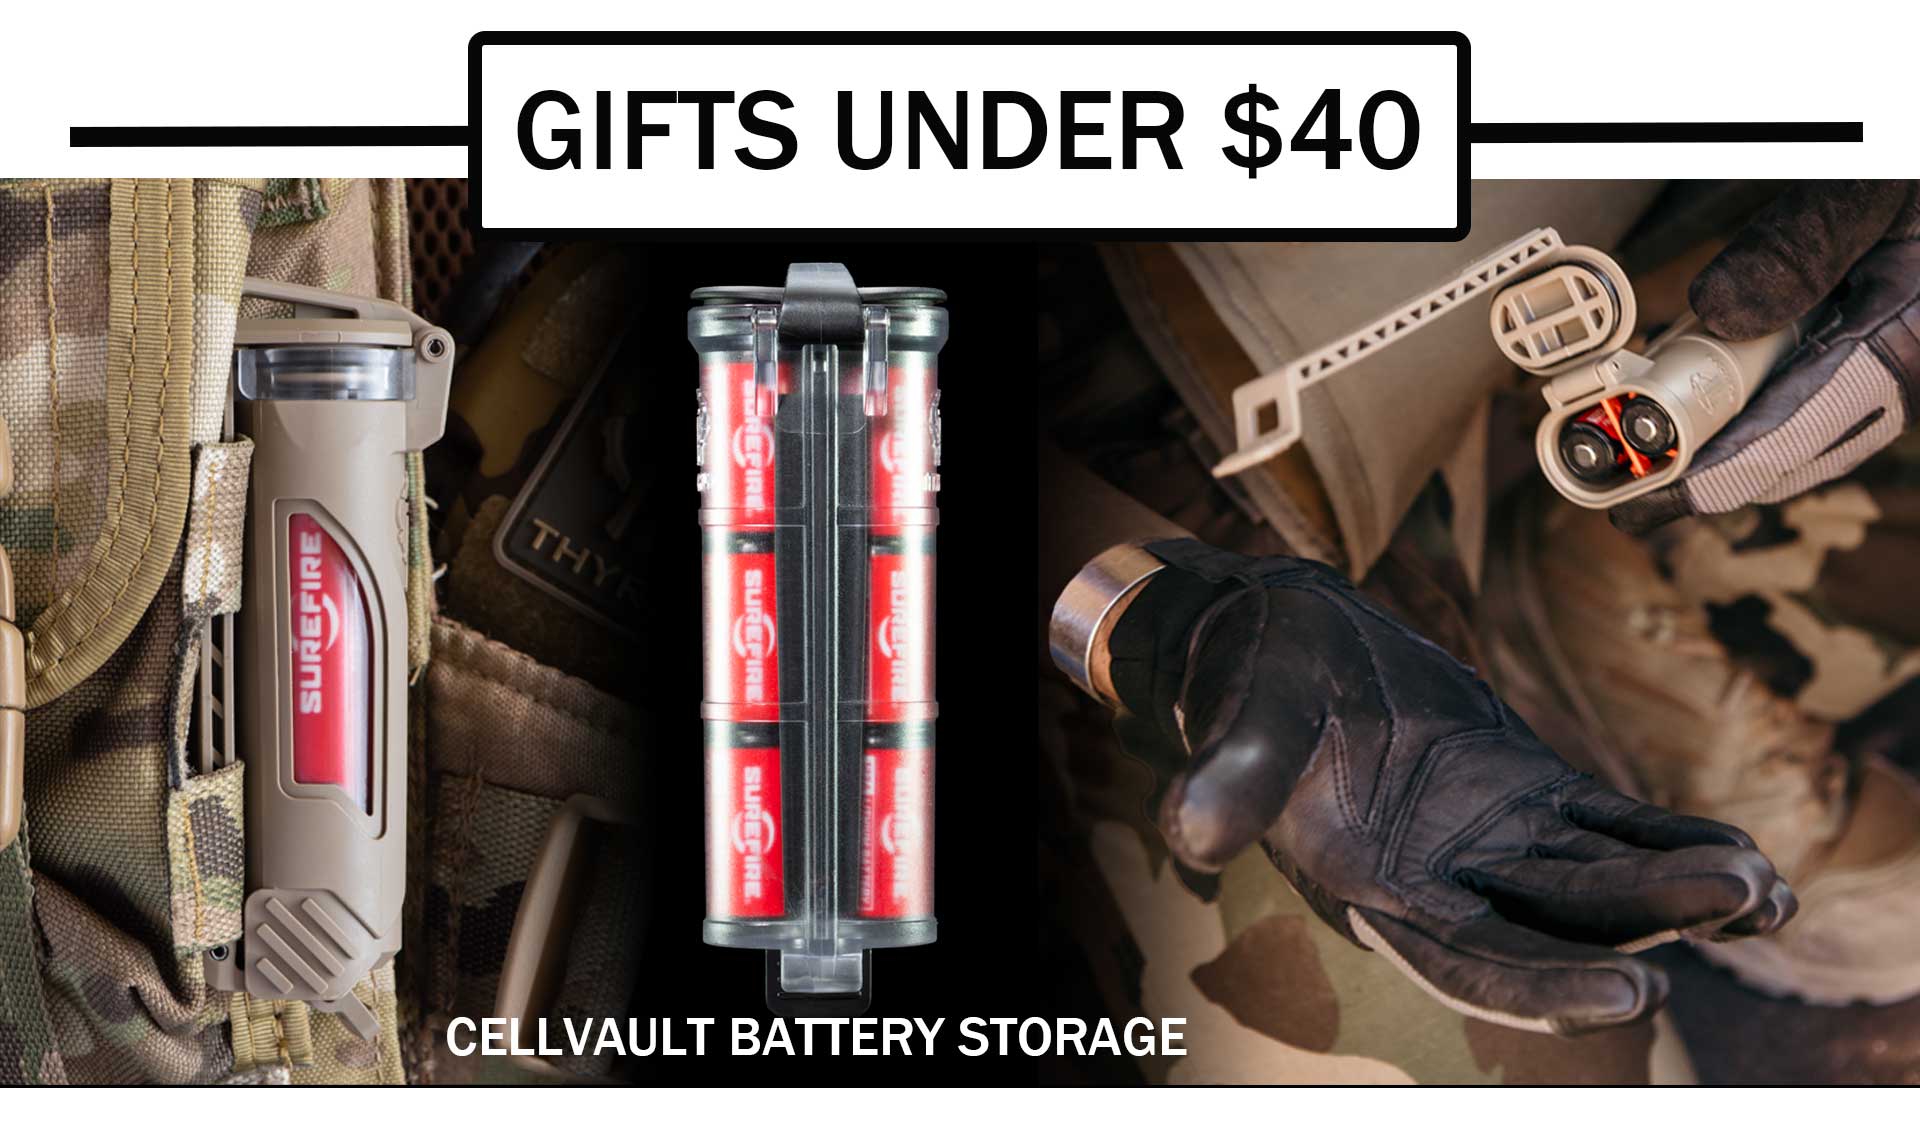 CellVault-18 or CellVault-21 and CellVault XL Battery Storage Cases